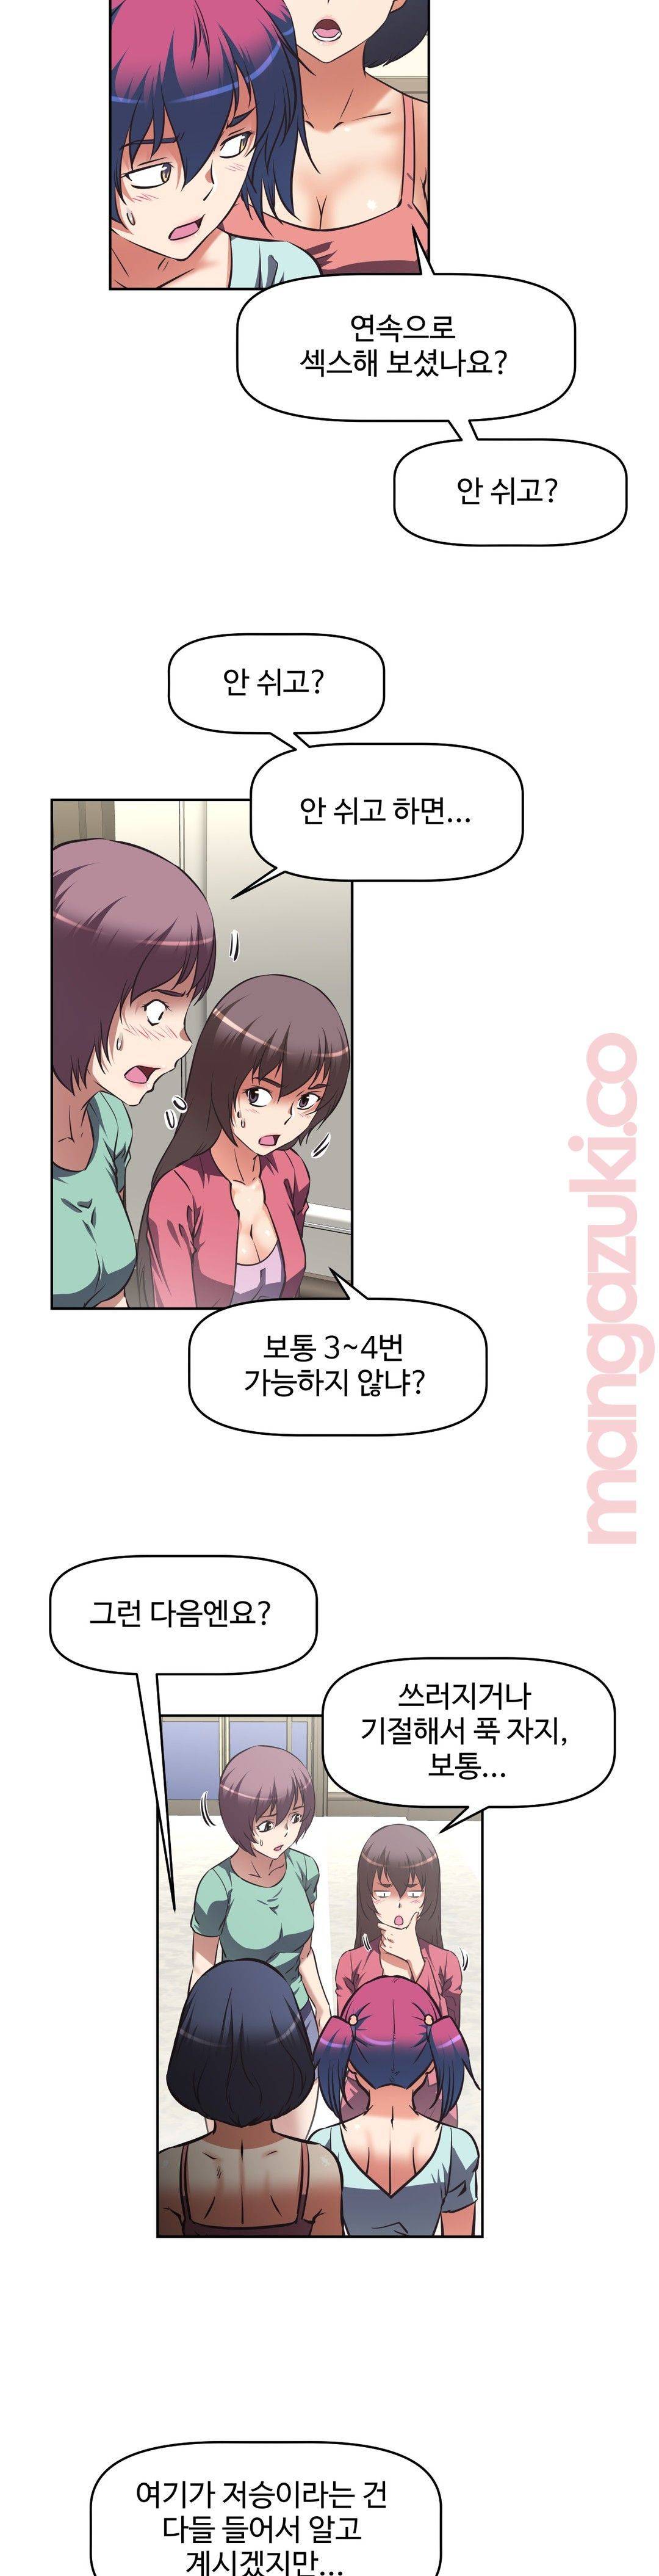 The Girls’ Nest Raw - Chapter 19 Page 6